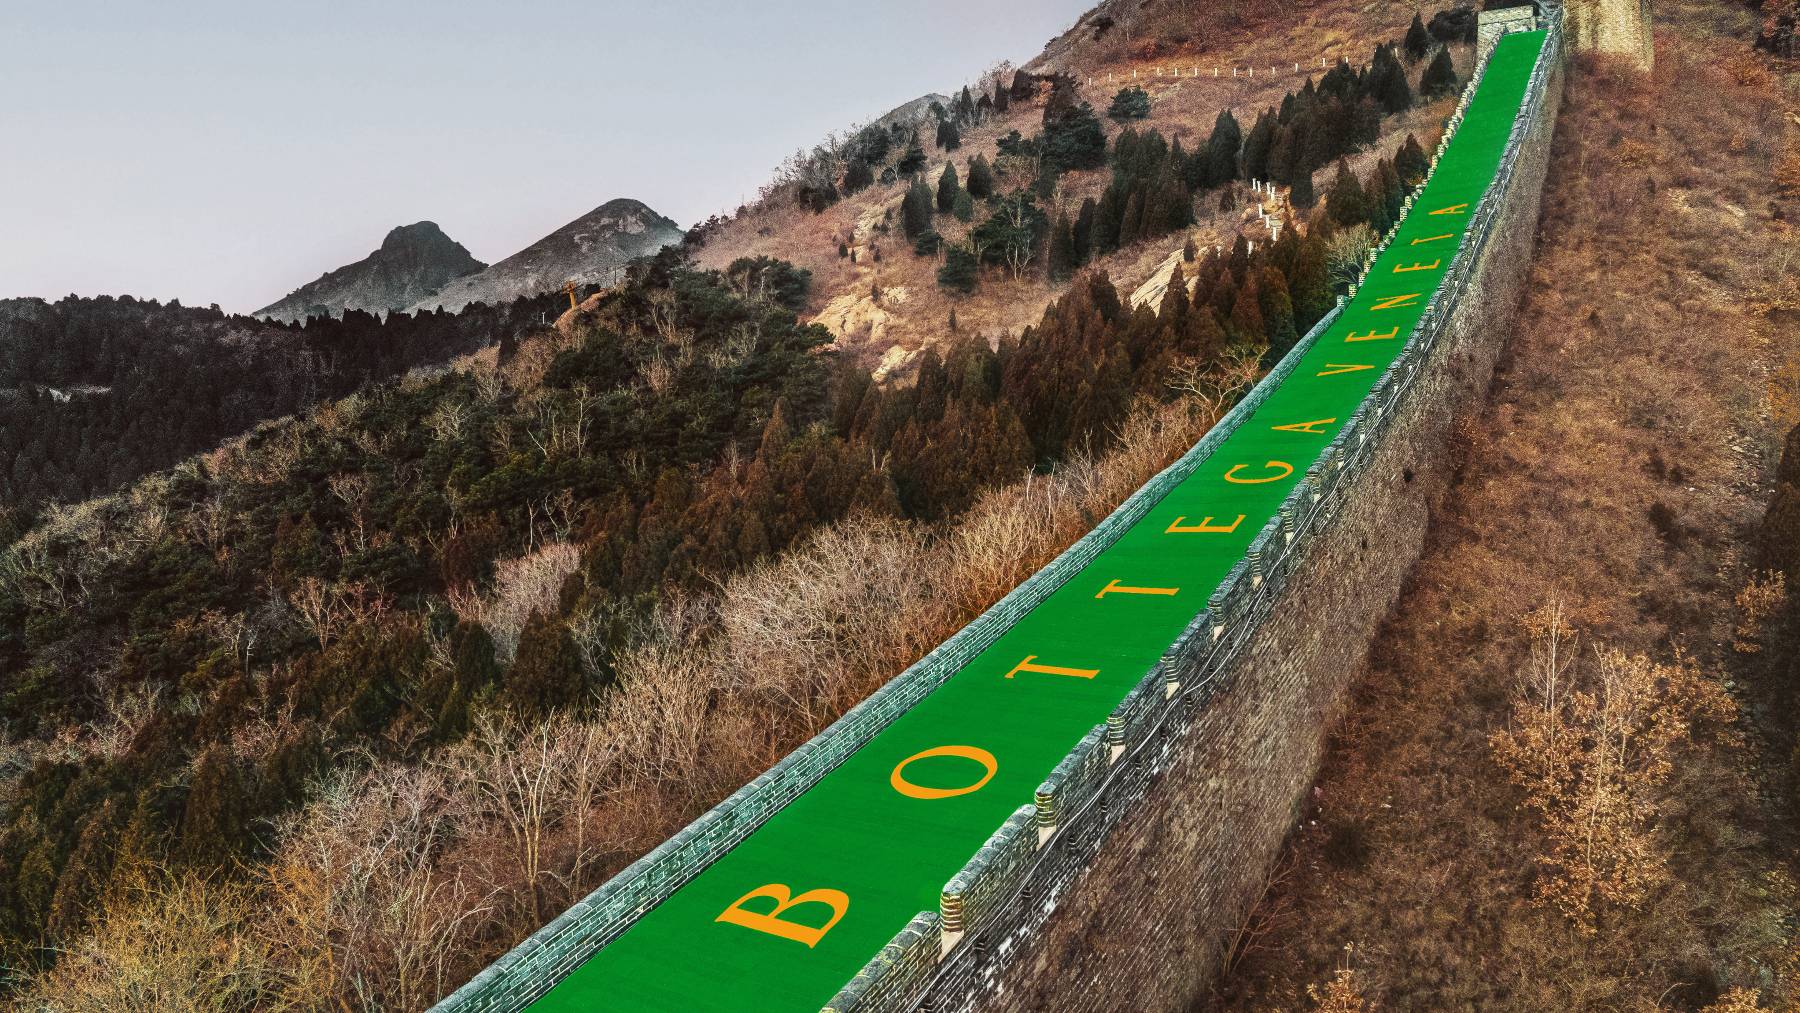 Bottega Veneta's takeover of the Great Wall of China will be live for six days. Courtesy